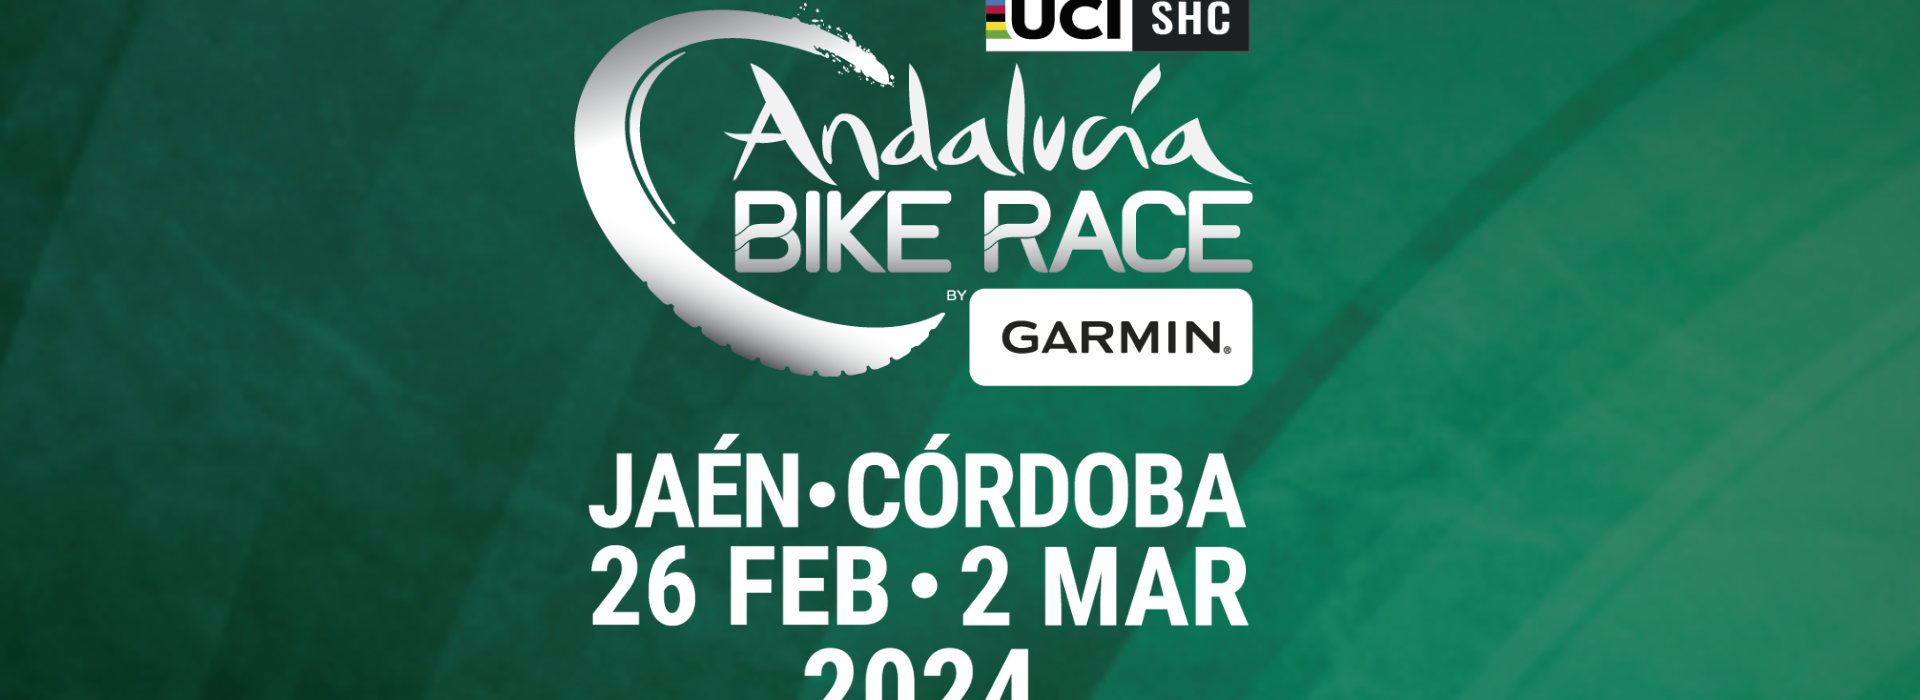 Confirmed dates for the 14th edition of the Andalucía Bike Race by GARMIN